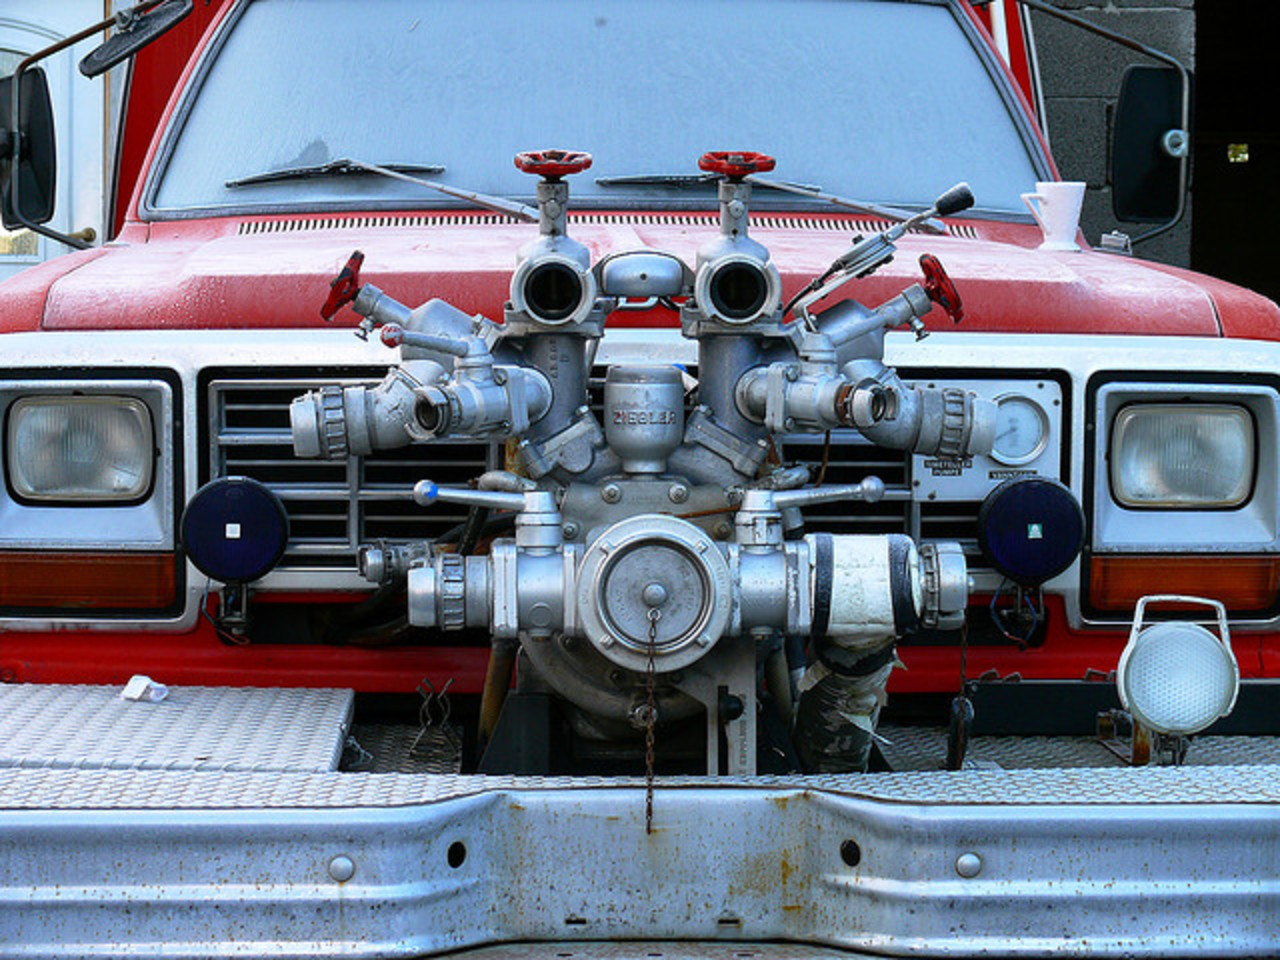 Dodge fire truck front view | Flickr - Photo Sharing!